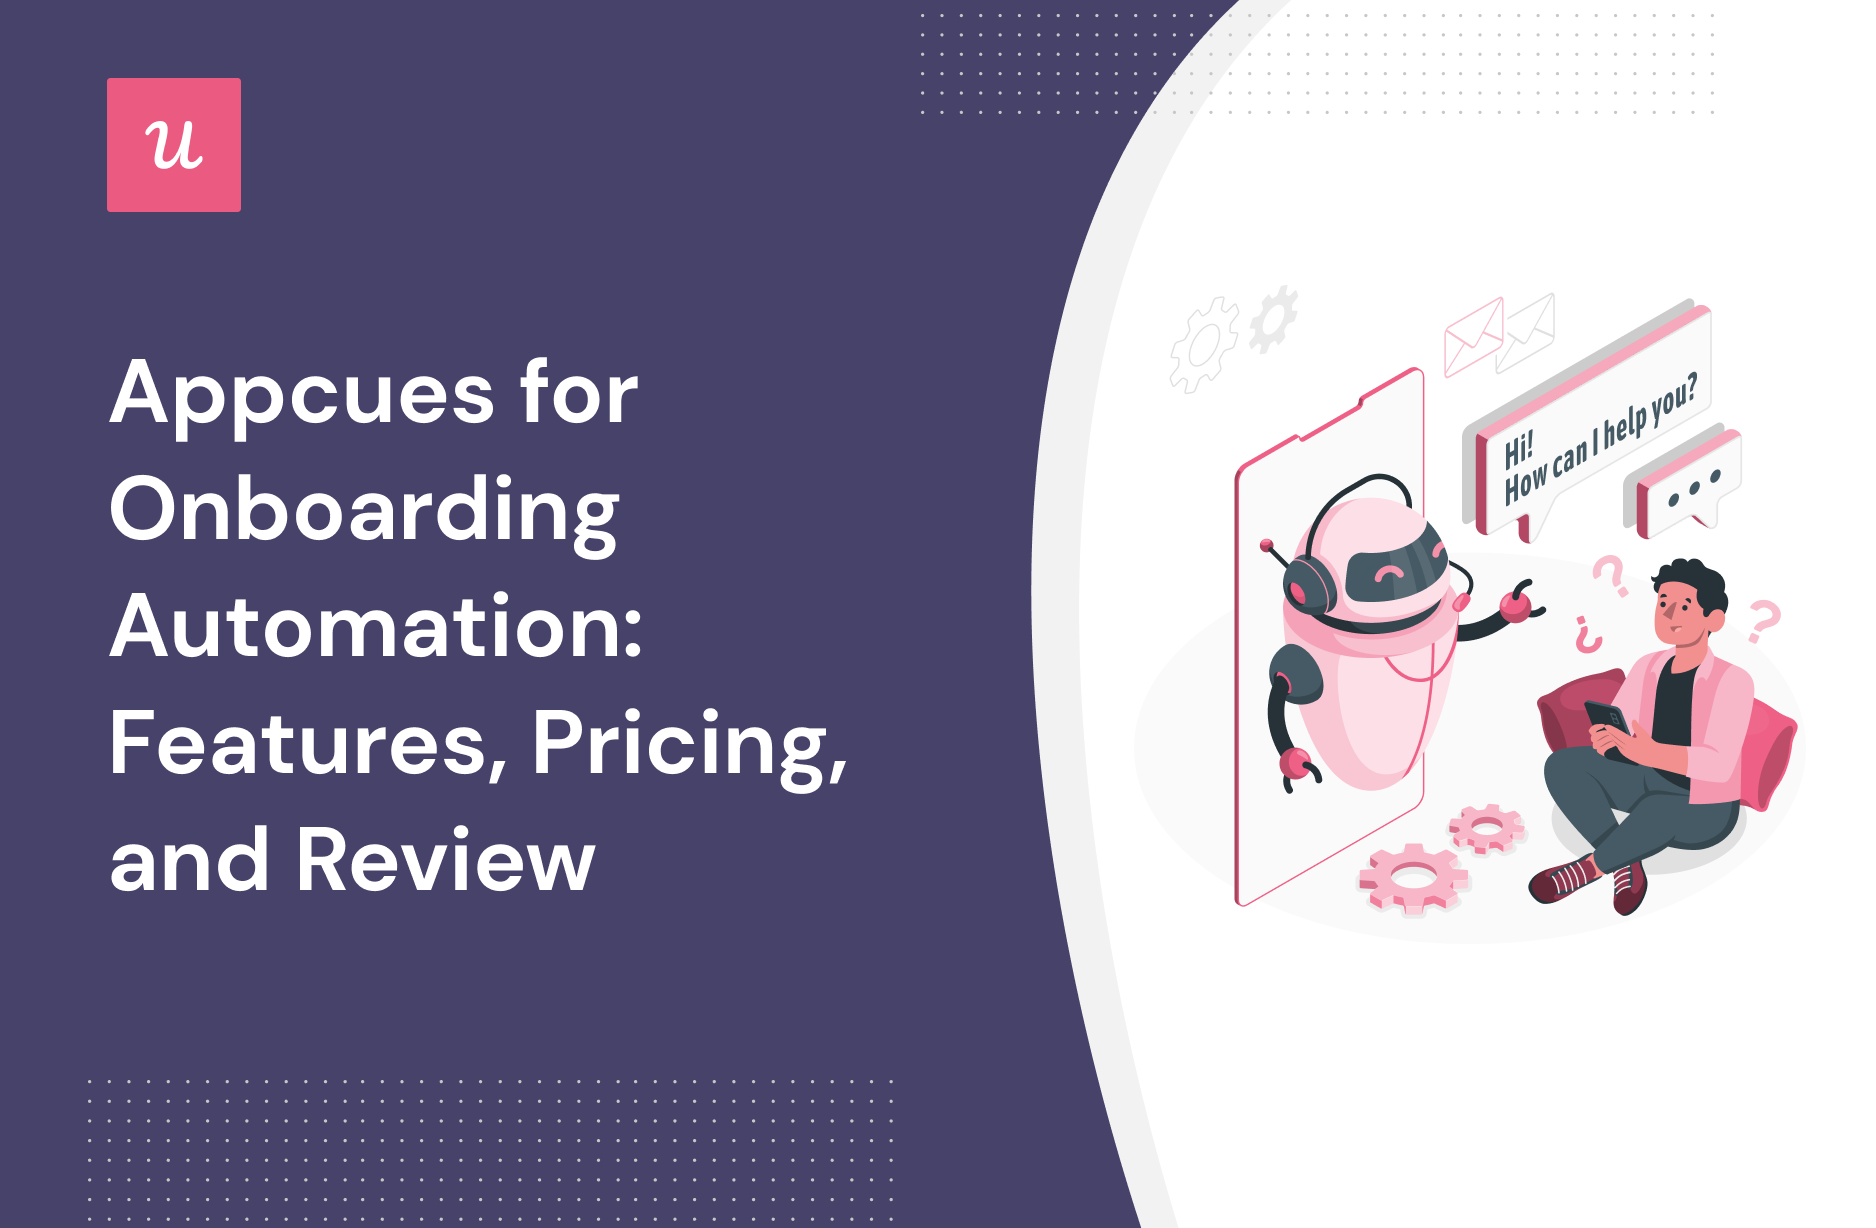 Appcues for Onboarding Automation: Features, Pricing, and Review